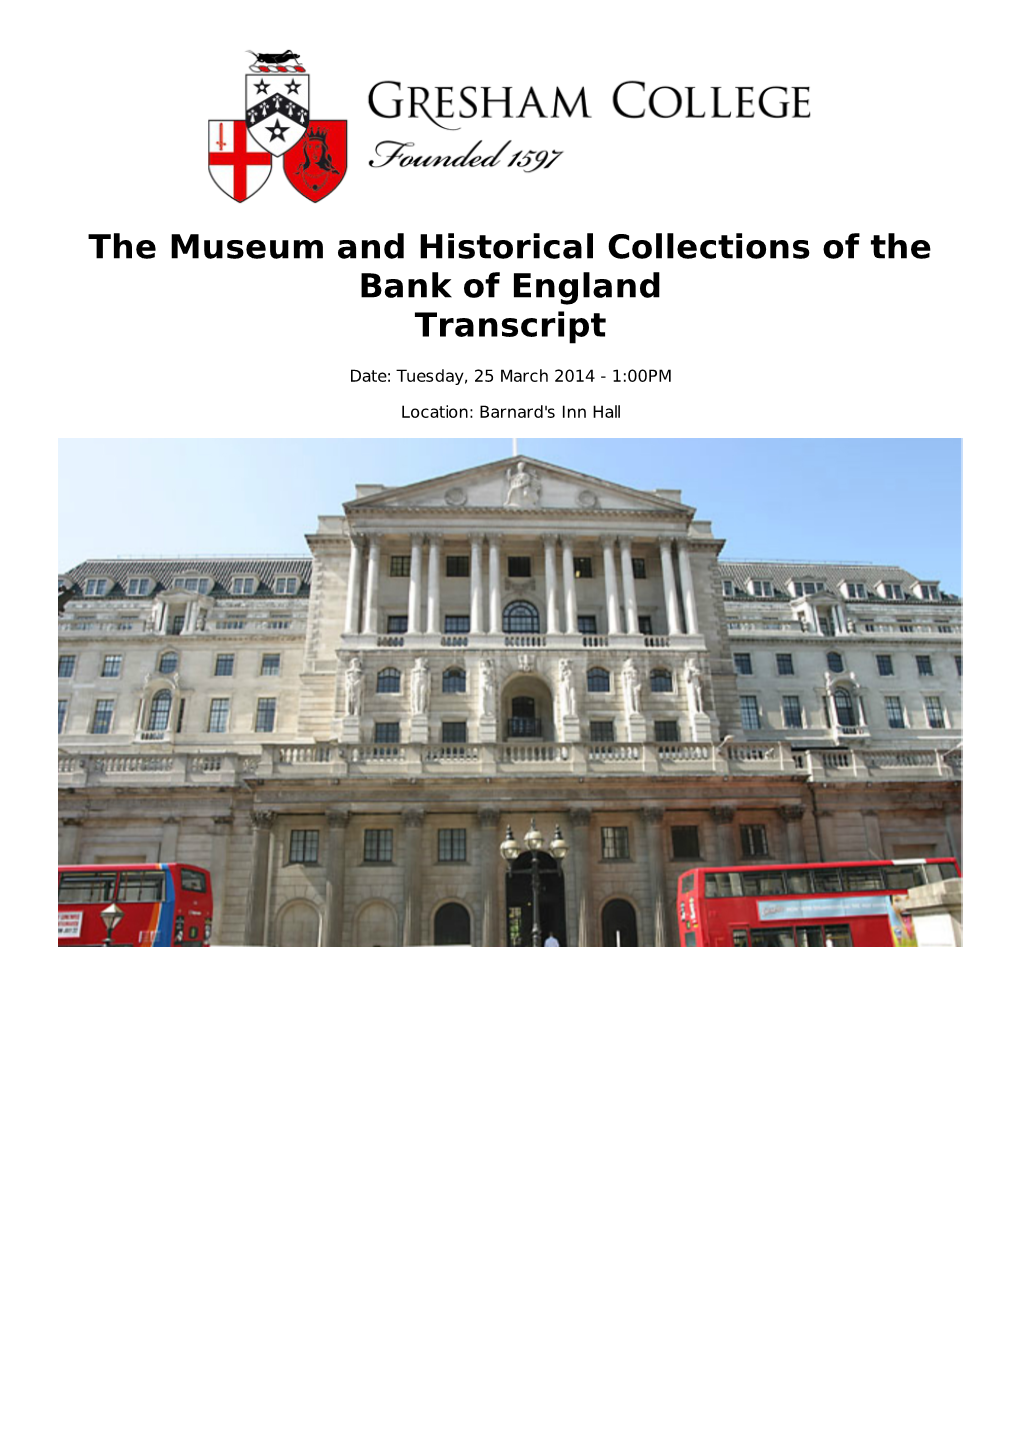 The Museum and Historical Collections of the Bank of England Transcript